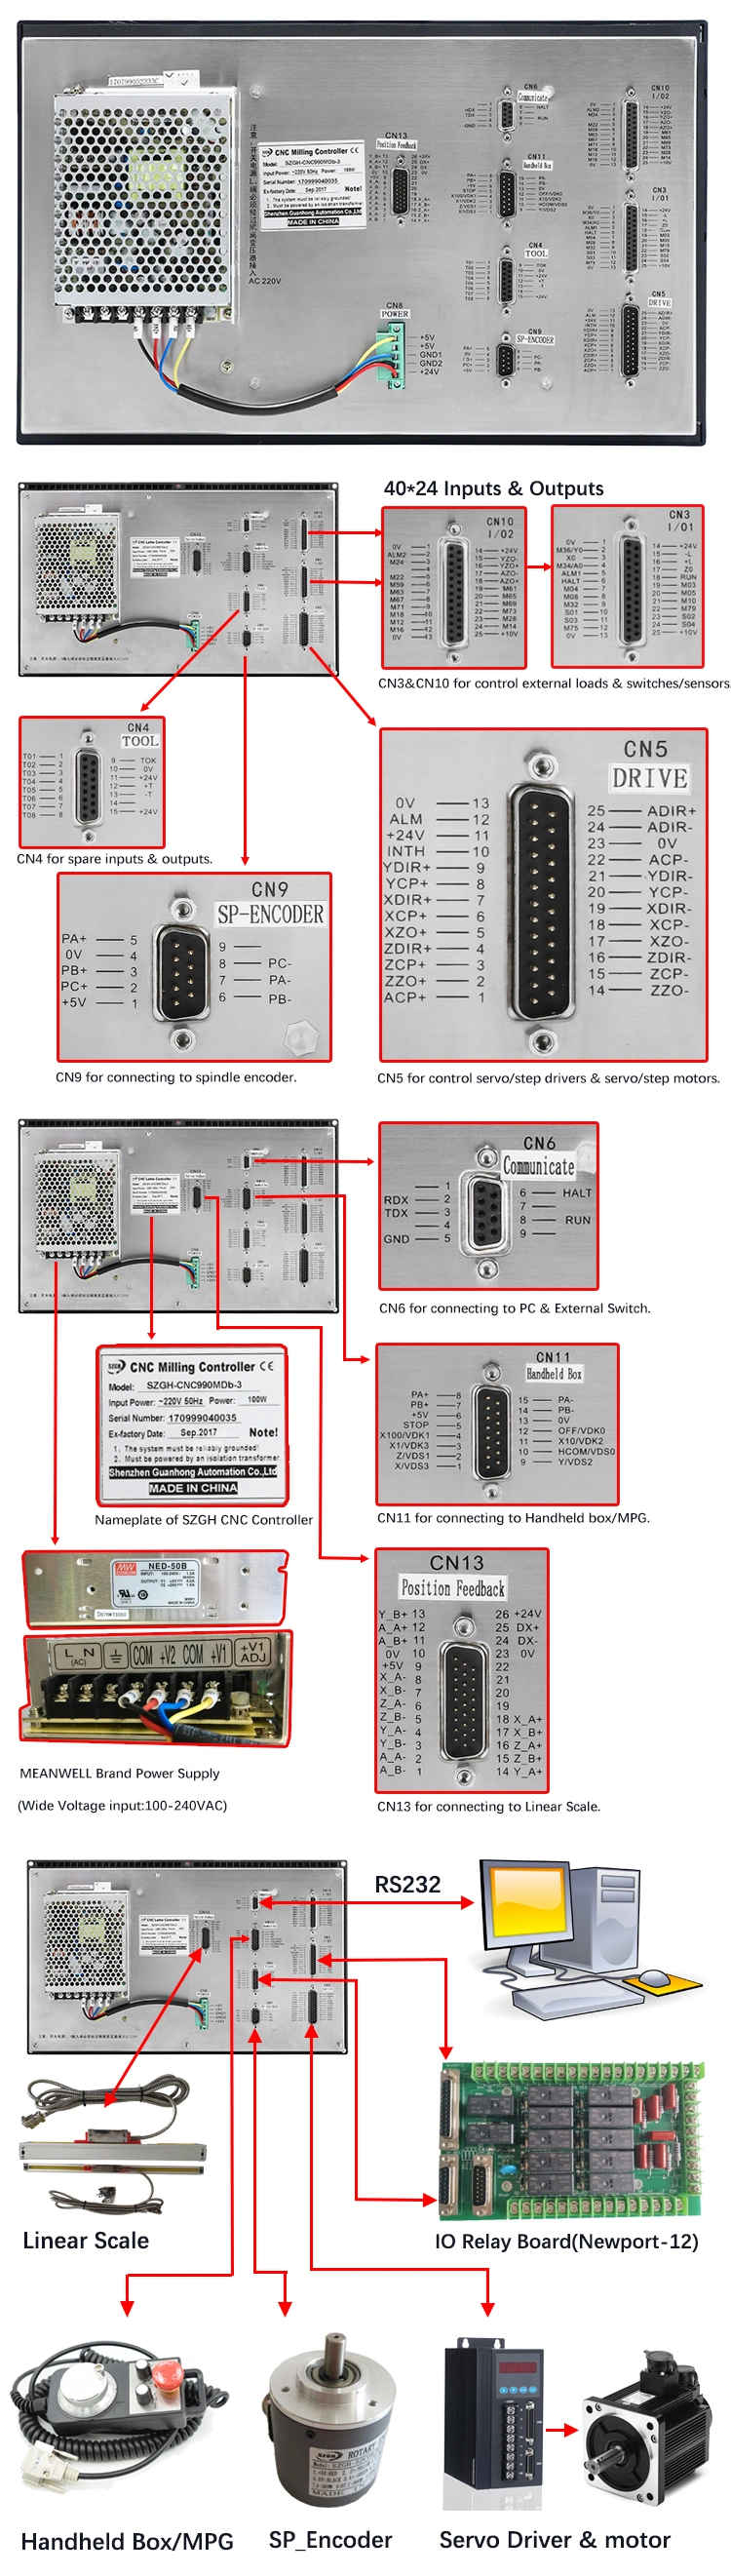 Hot Selling 4 Axis CNC Milling Controller for Plasma Cutting Machine Support Rtcp Mode, Following Mode/Interpolate Mode